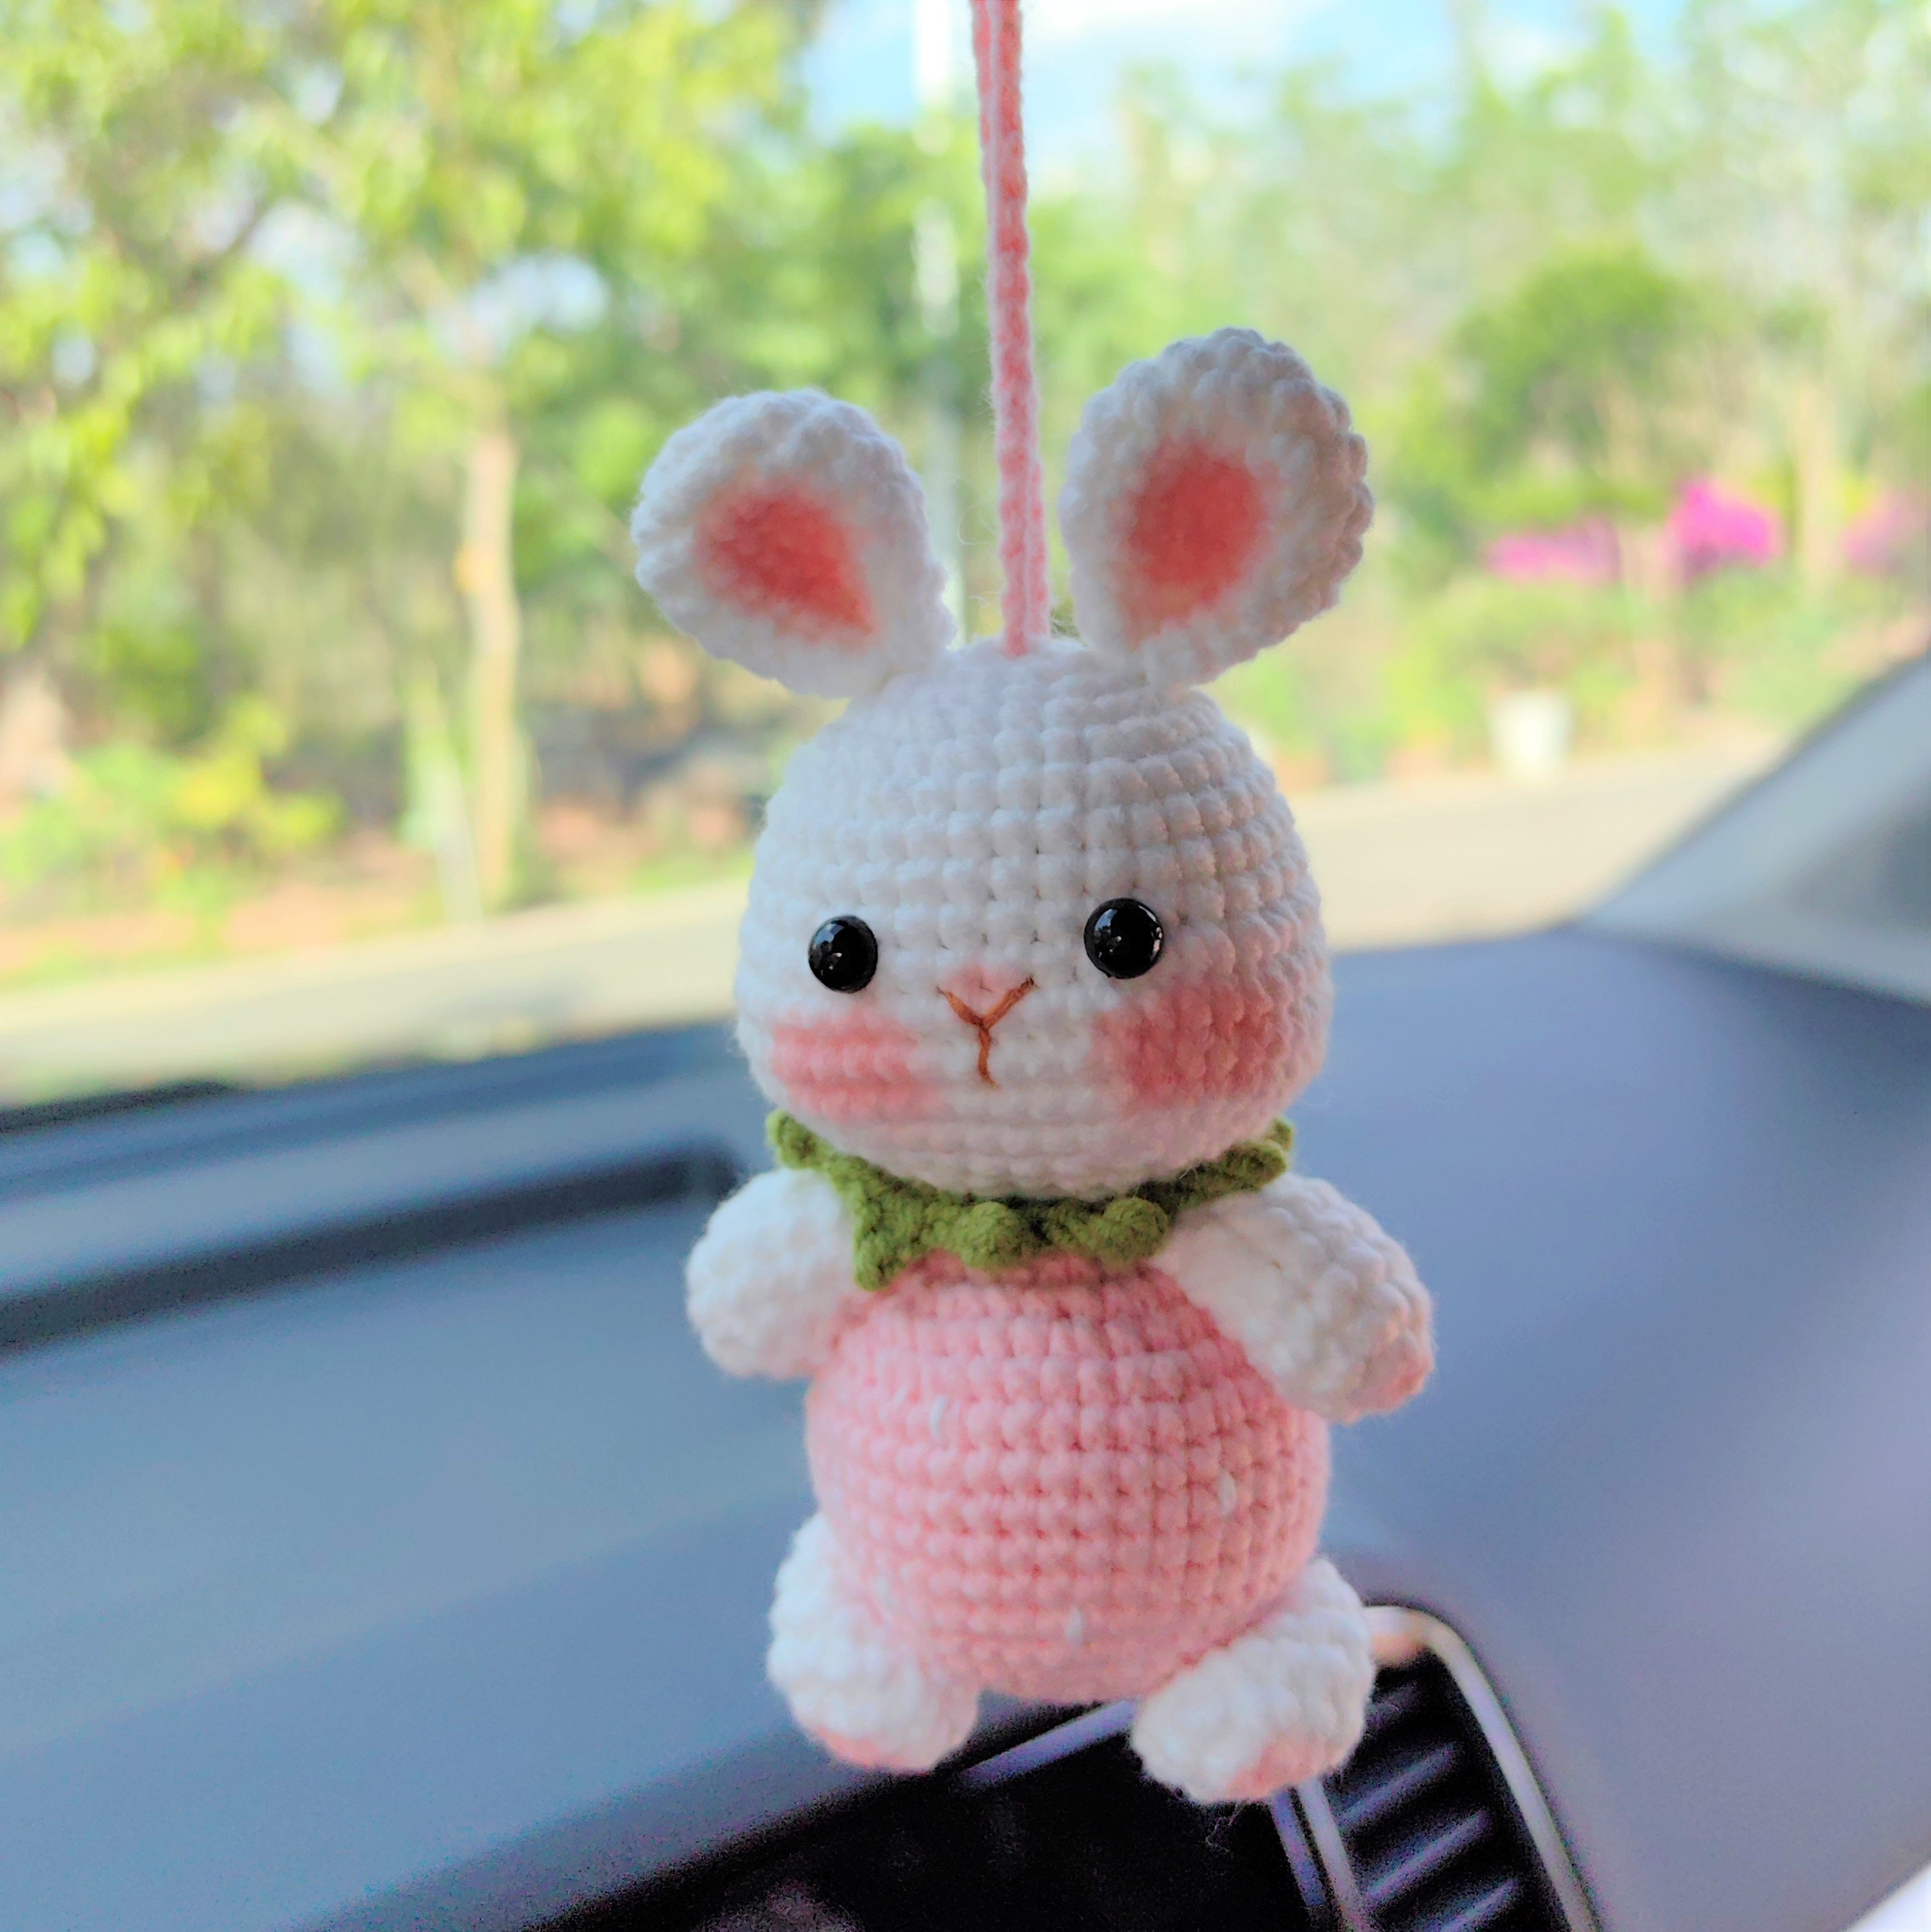 Anime Car Accessories of No Face Man Car , Hanging Swing ,for Car Rear View  Mirrior ,Office Home Hanging Micro Landscape Decor. - Ajeeb Ghareeb .  Phones Tablet Games Electronics Tools ana Accessories